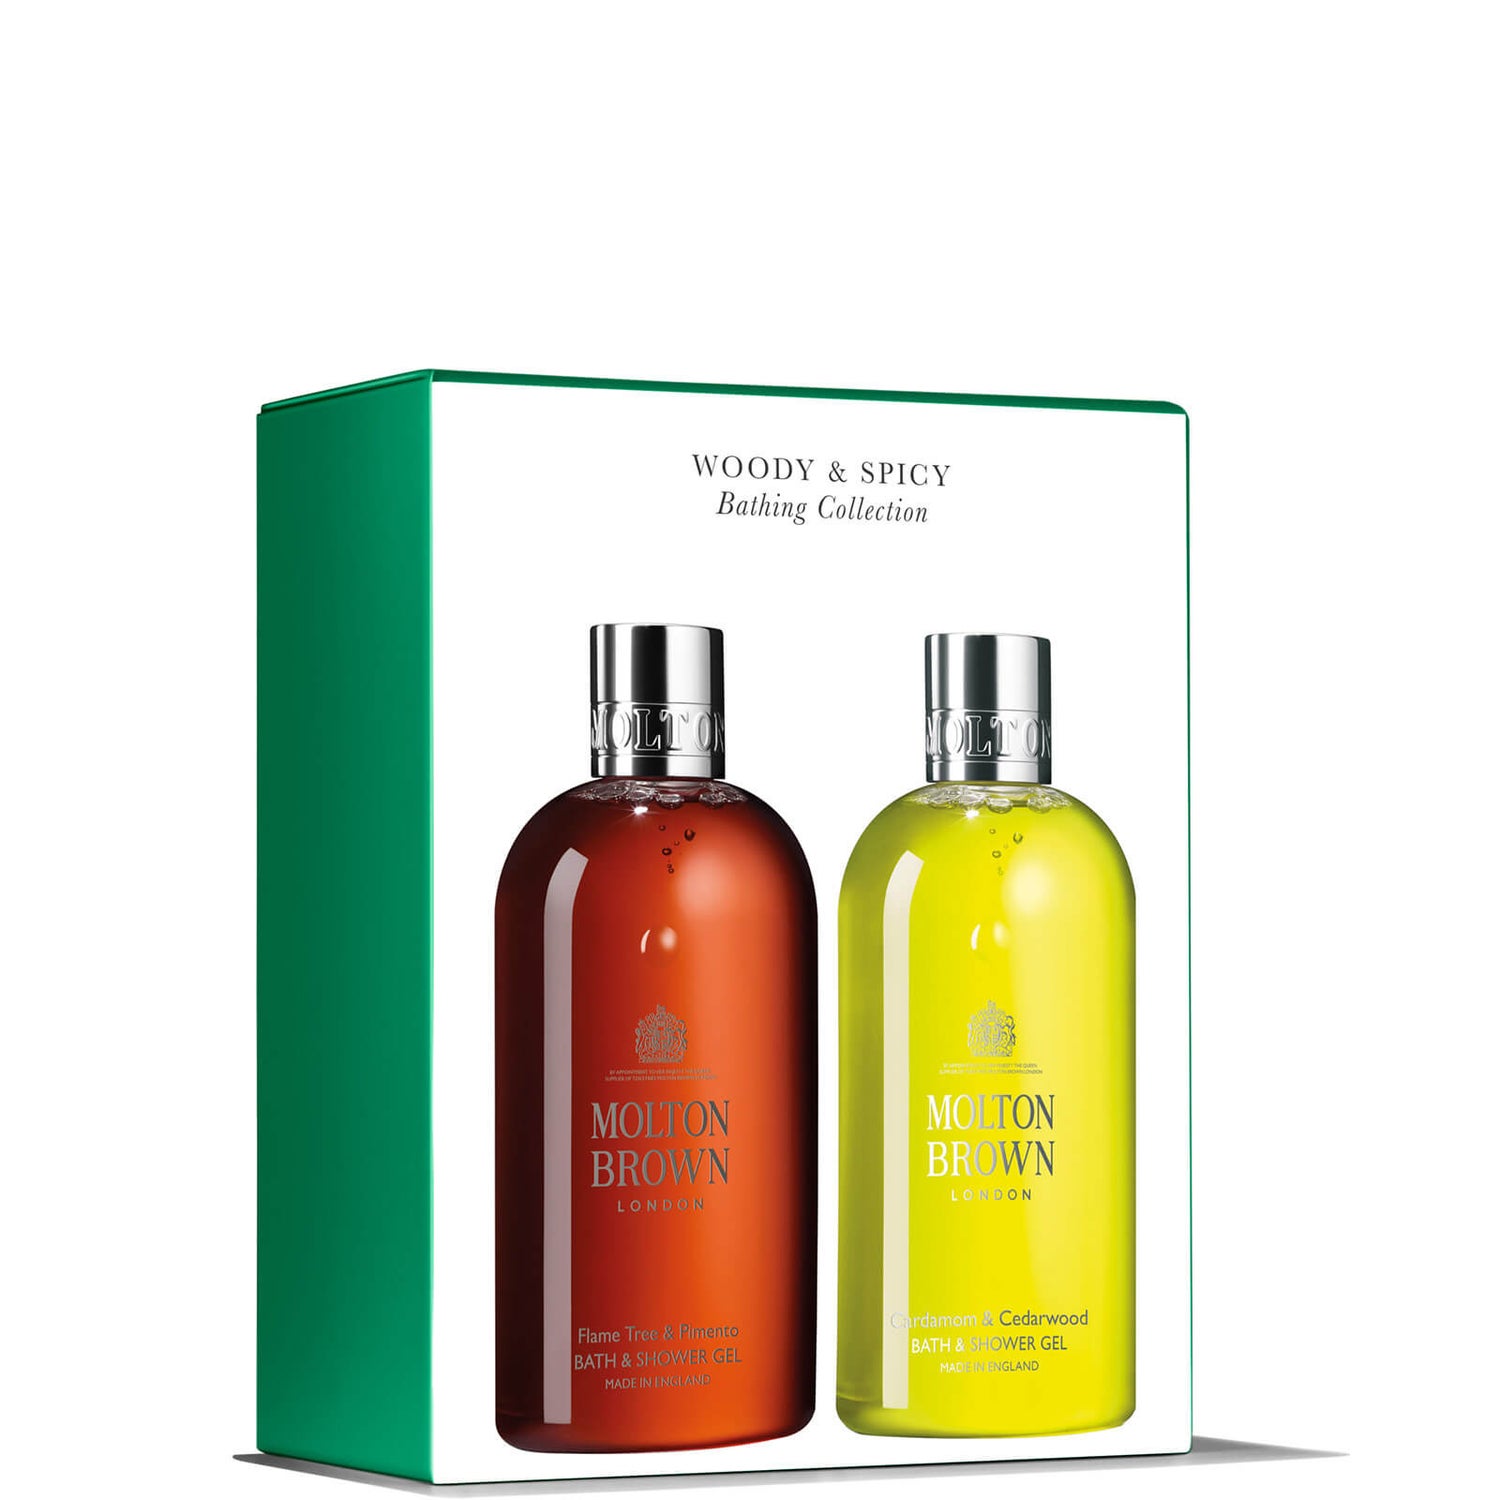 Molton Brown Woody and Spicy Bathing Collection